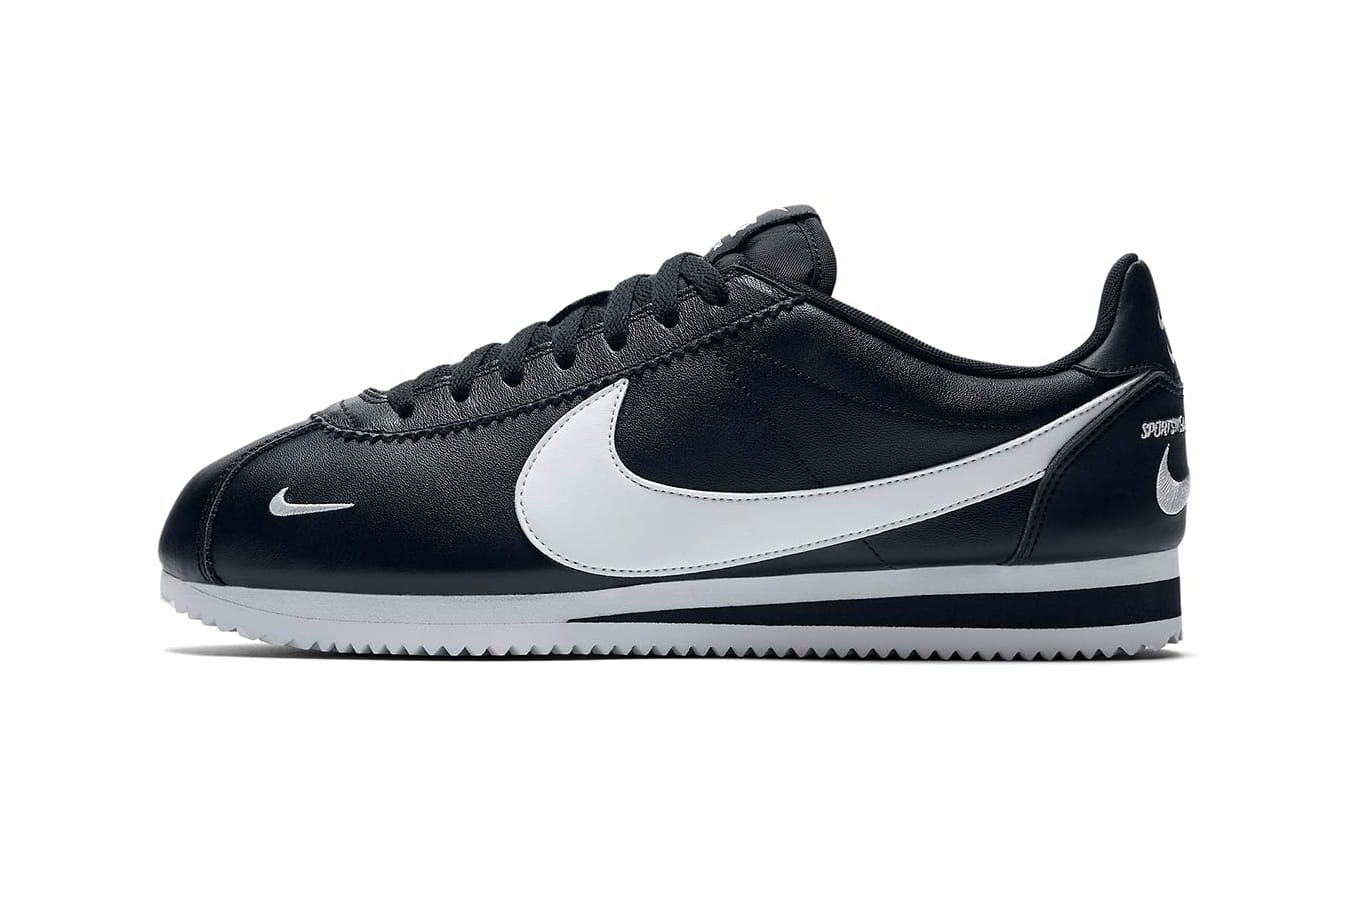 Nike Unveils New Cortez With a Swarm of Swooshes | HYPEBEAST